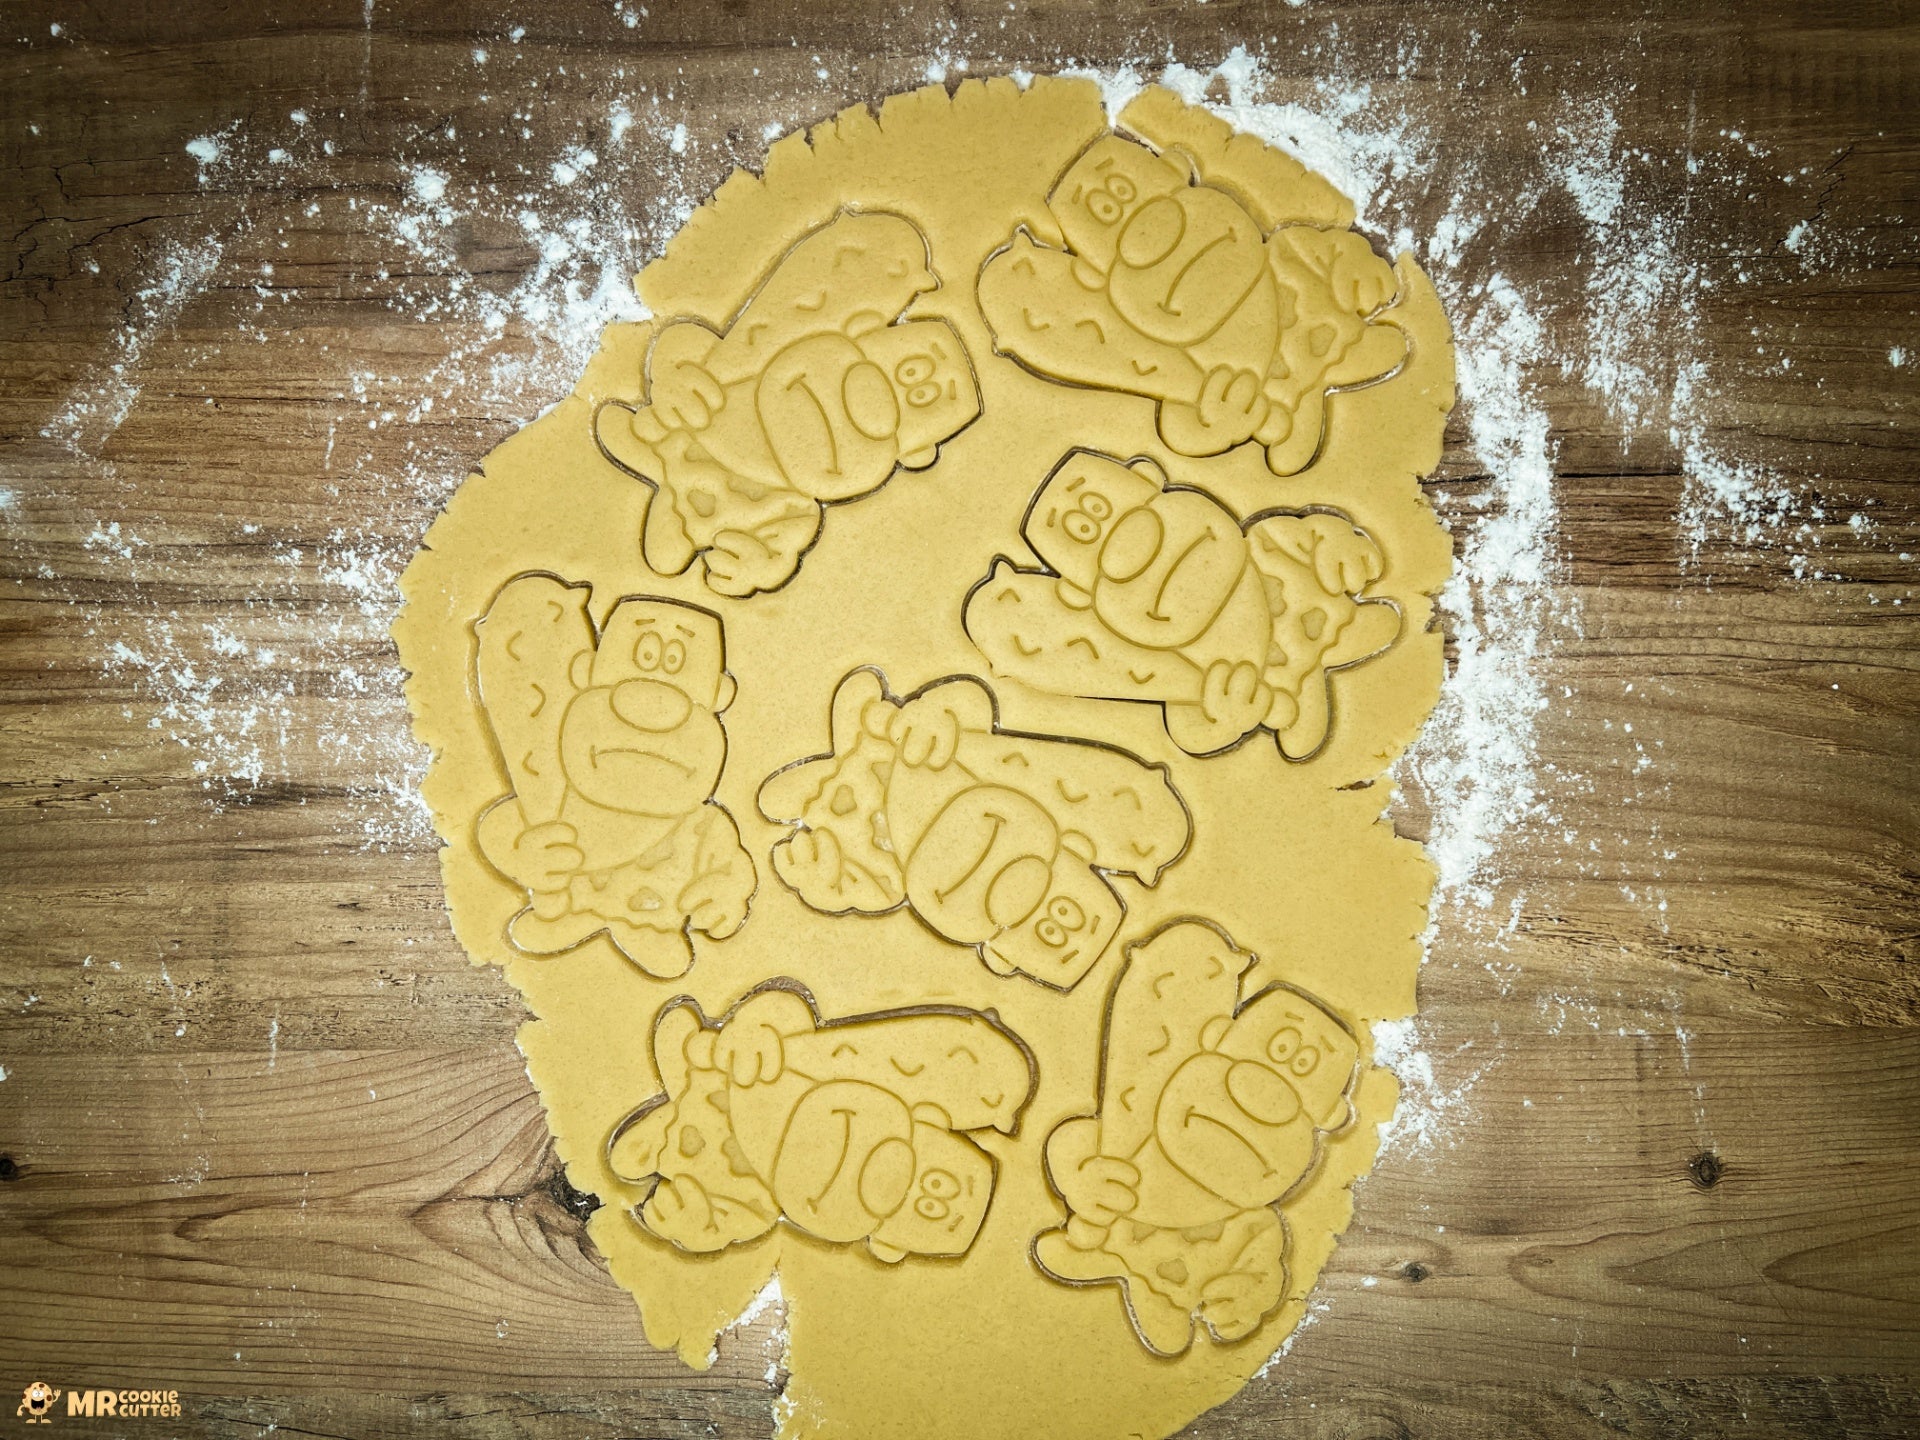 Caveman Cookie Cutter Shapes in dough